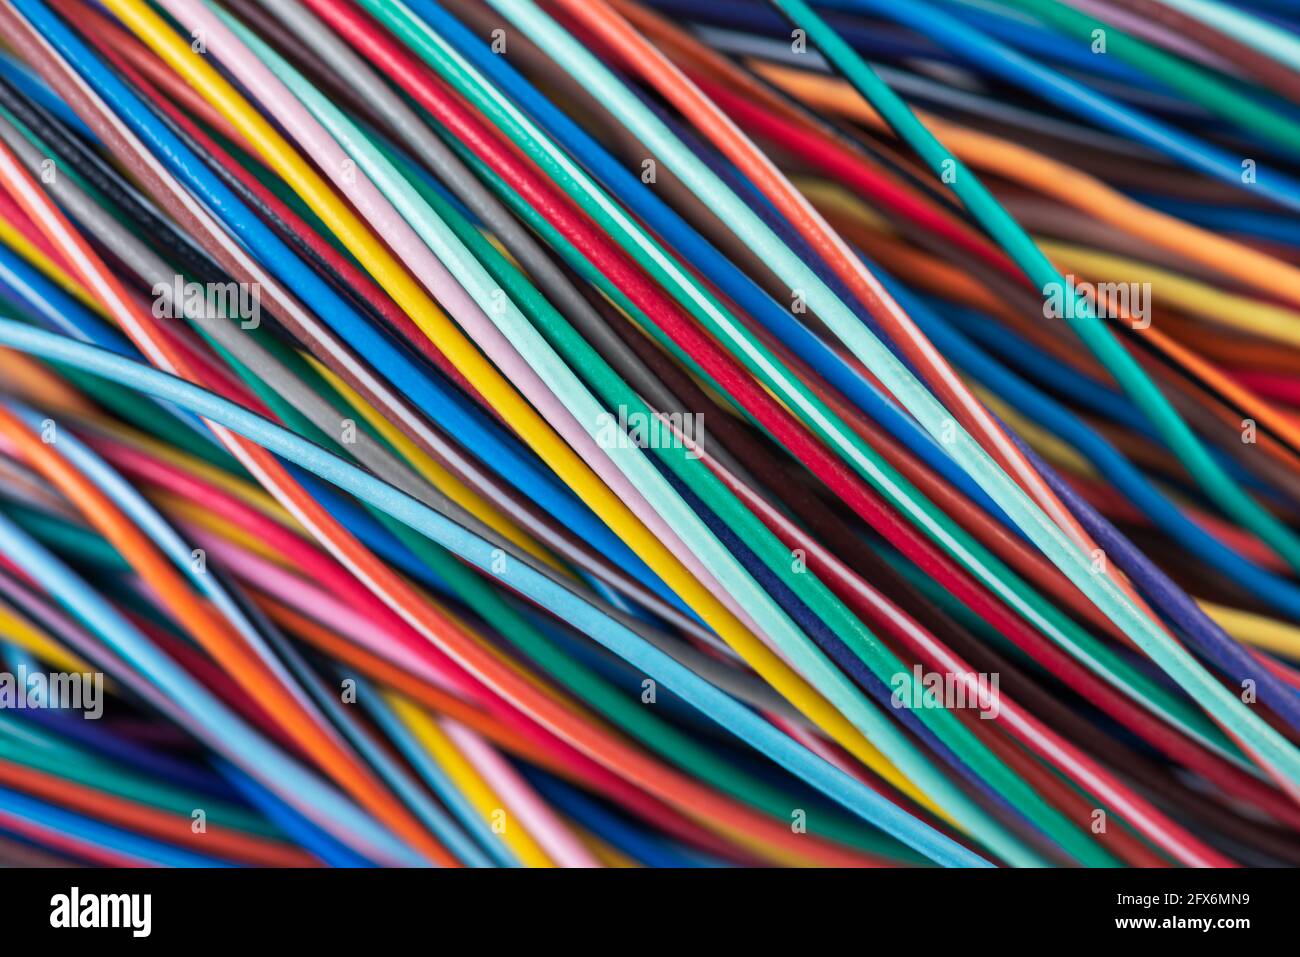 Telecommunications electrical cable wiring background Stock Photo